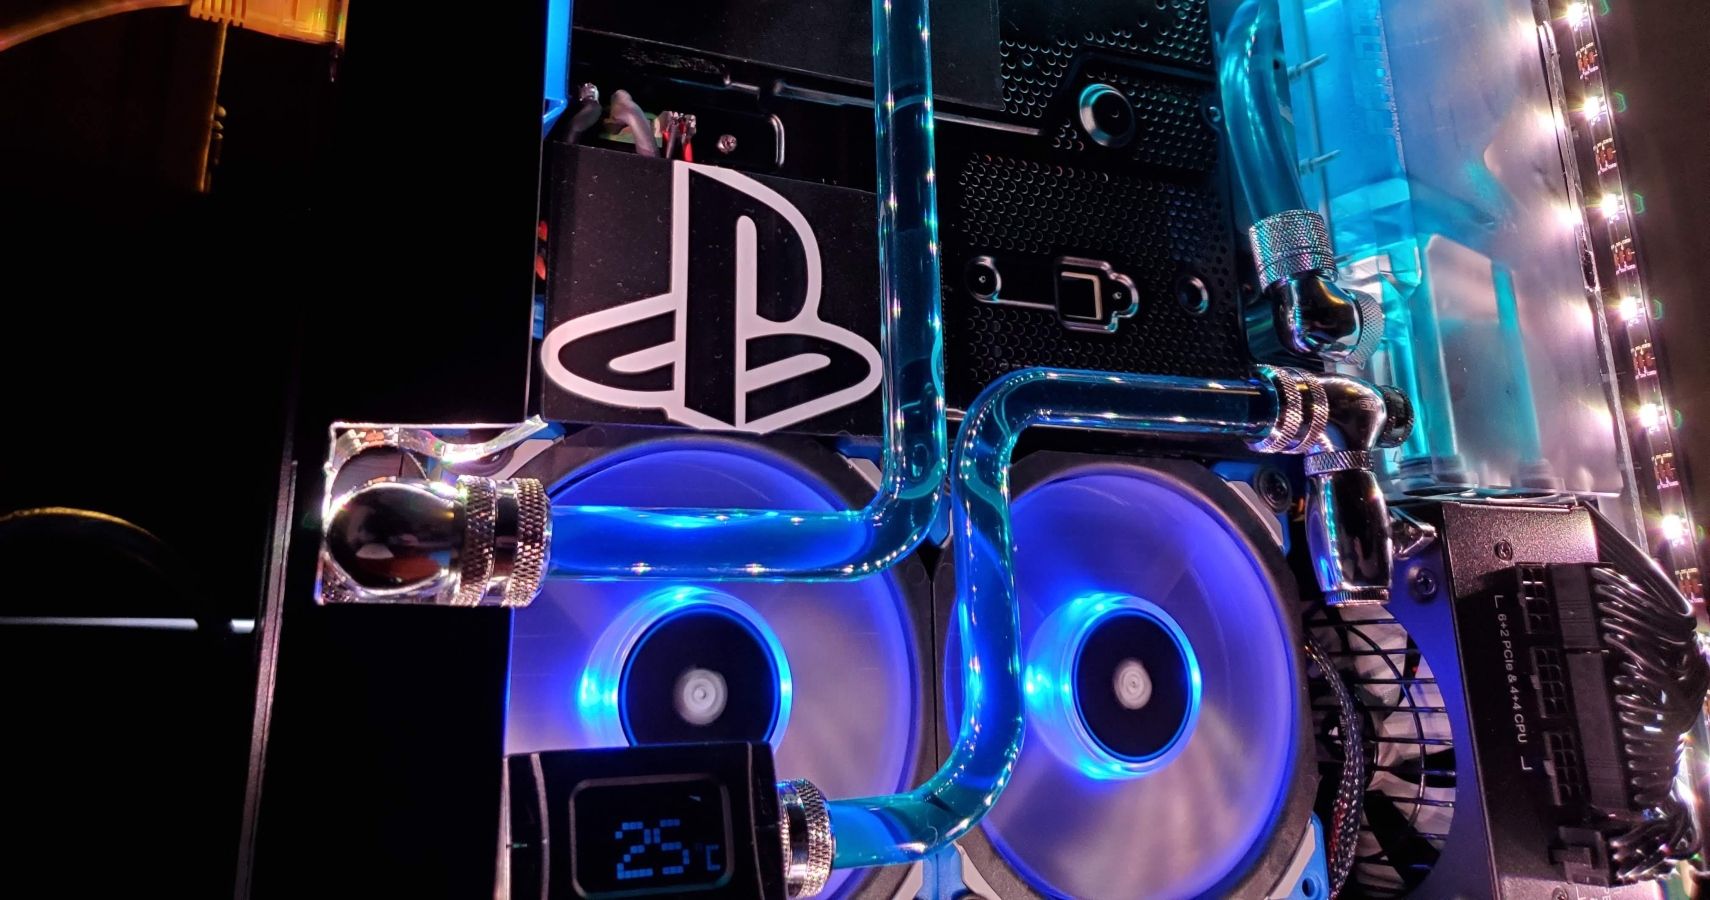 Tanzania vidne opadgående YouTuber Shows Off Insane Water-Cooling System On PS4 Pro